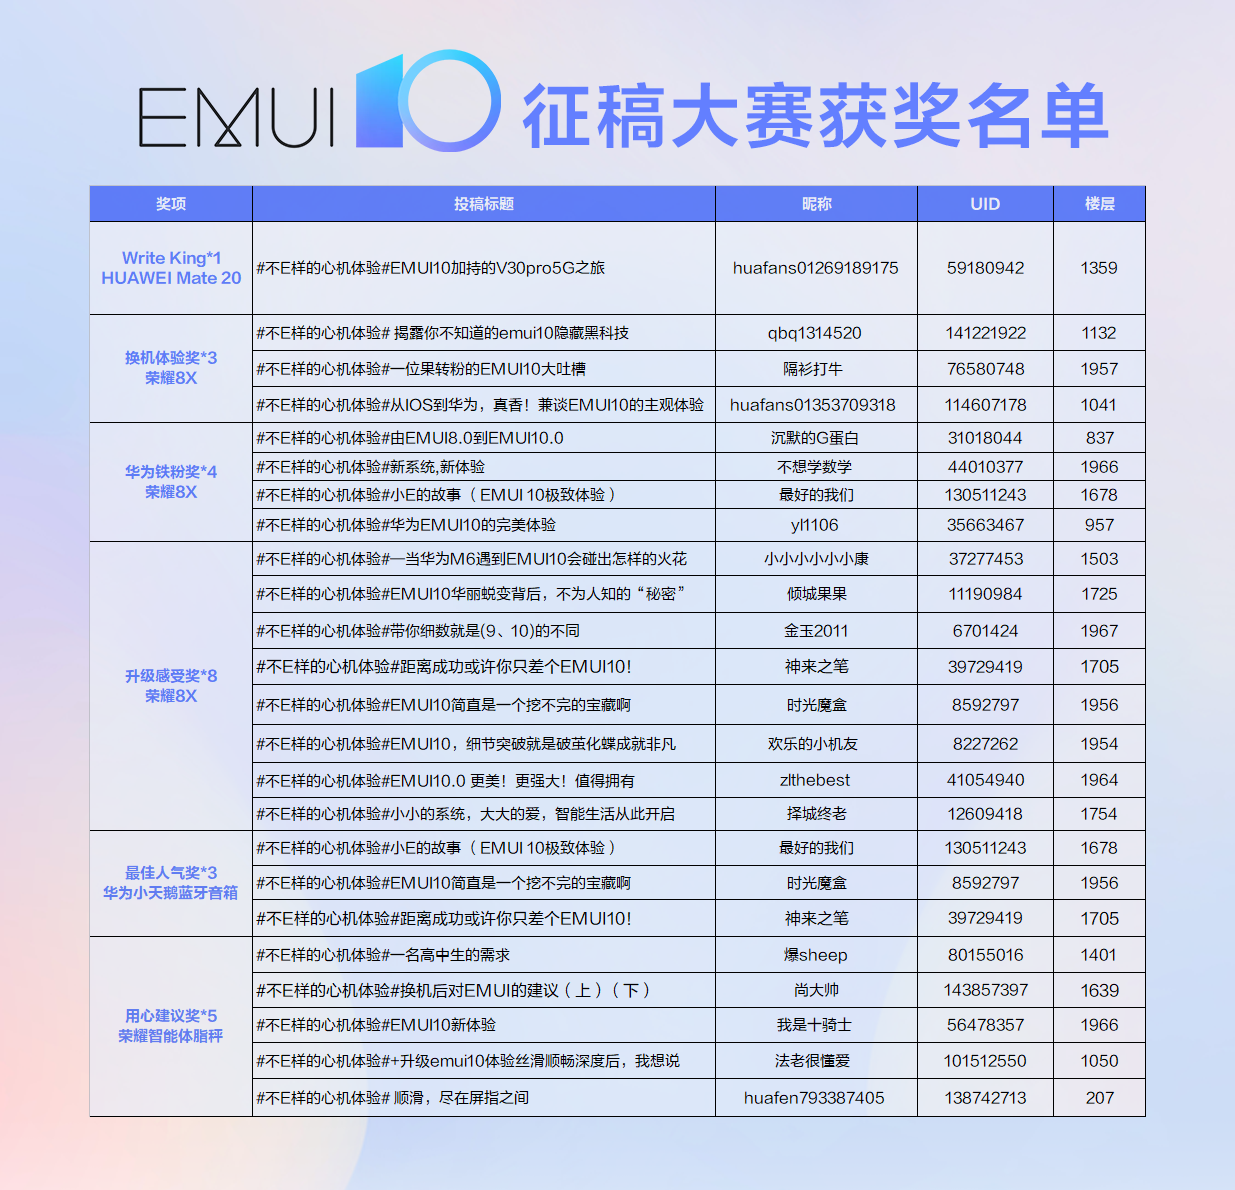 EMUI10 Call for Papers